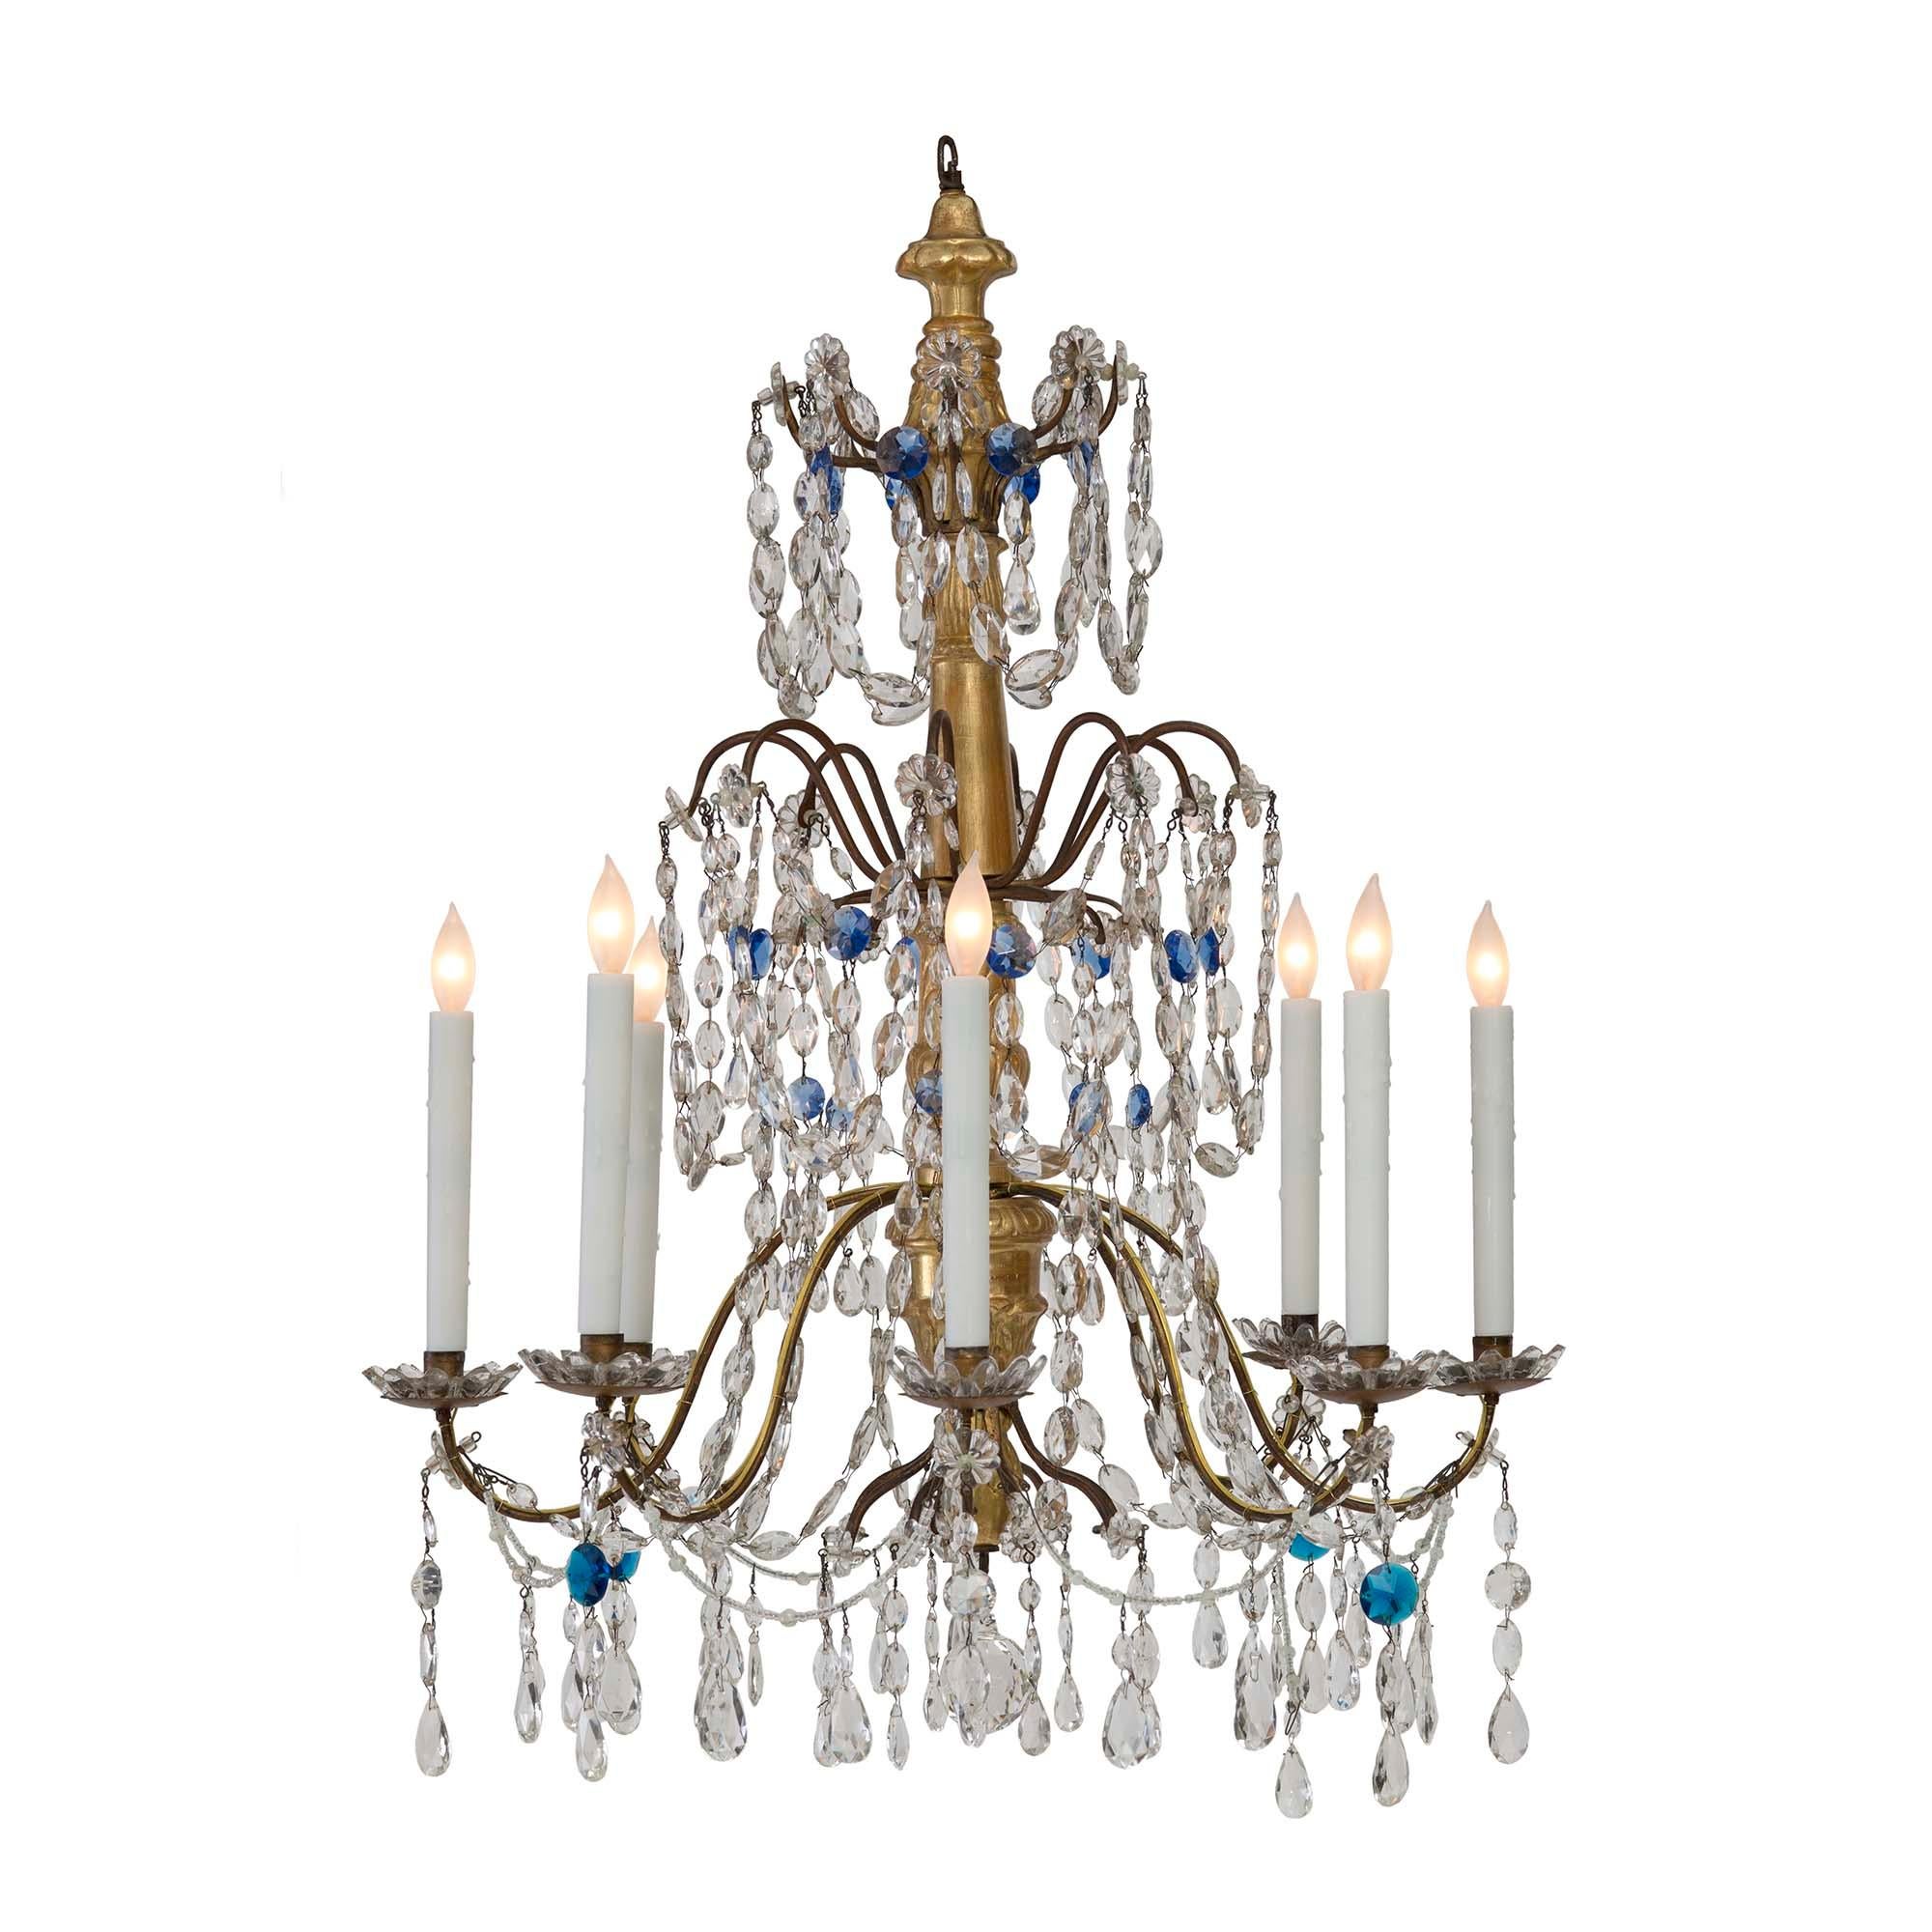 A charming Italian 18th century giltwood, gilt metal and glass eight light chandelier. The chandelier with eight electrified S scrolled metal arms leading to giltwood candle cups and ridged patinated metal saucers. The arms are decorated with glass